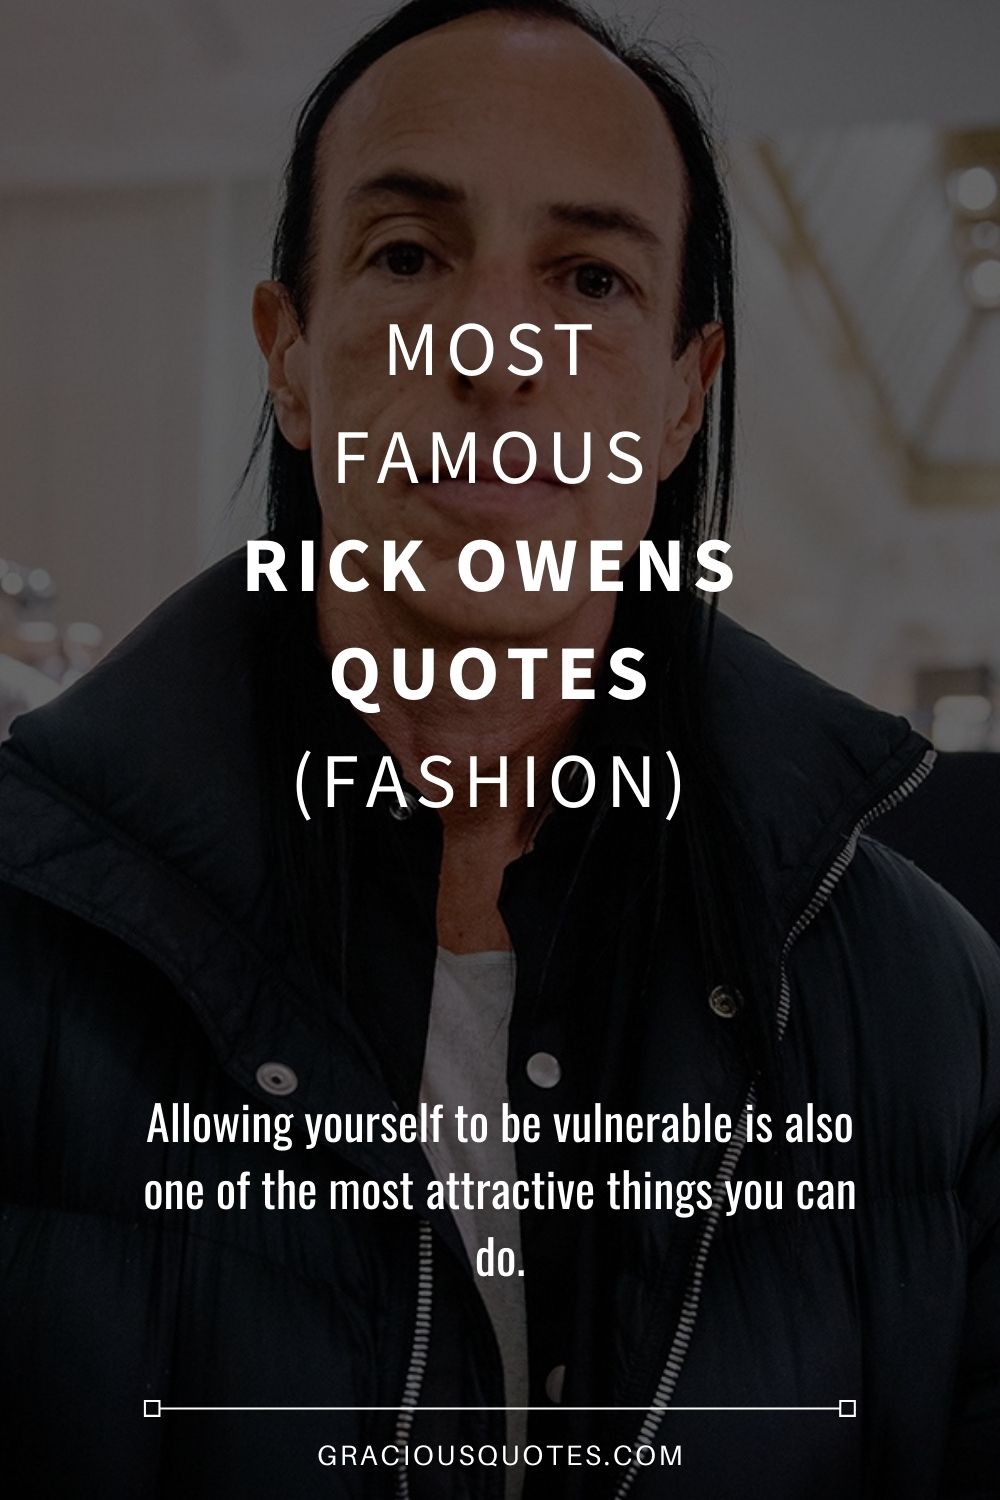 Most Famous Rick Owens Quotes (FASHION) - Gracious Quotes